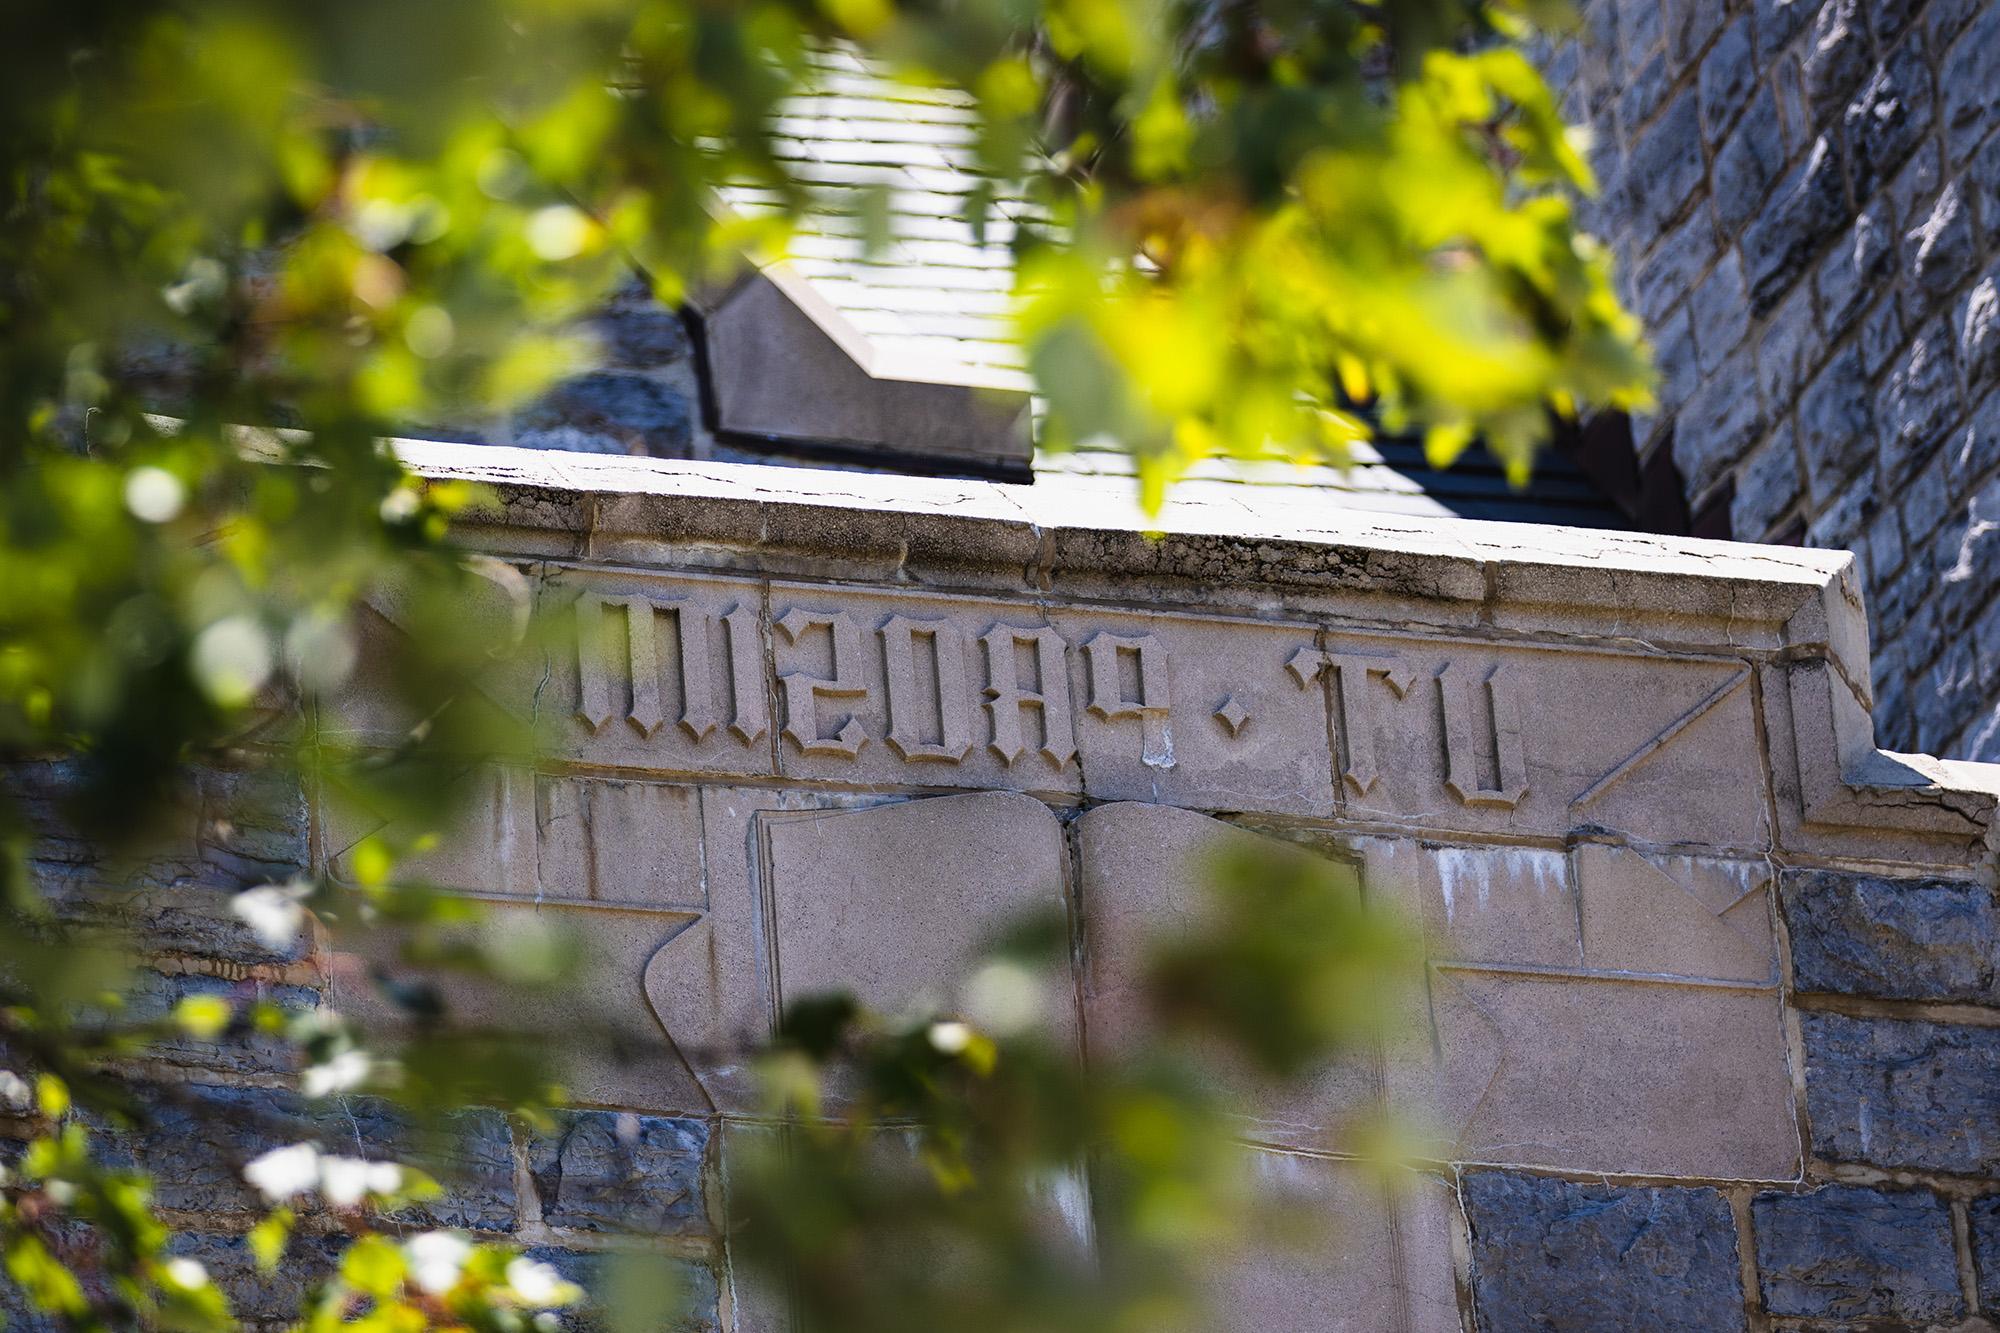 The university motto - Ut Prosim - appears on an archway on the Blacksburg campus.